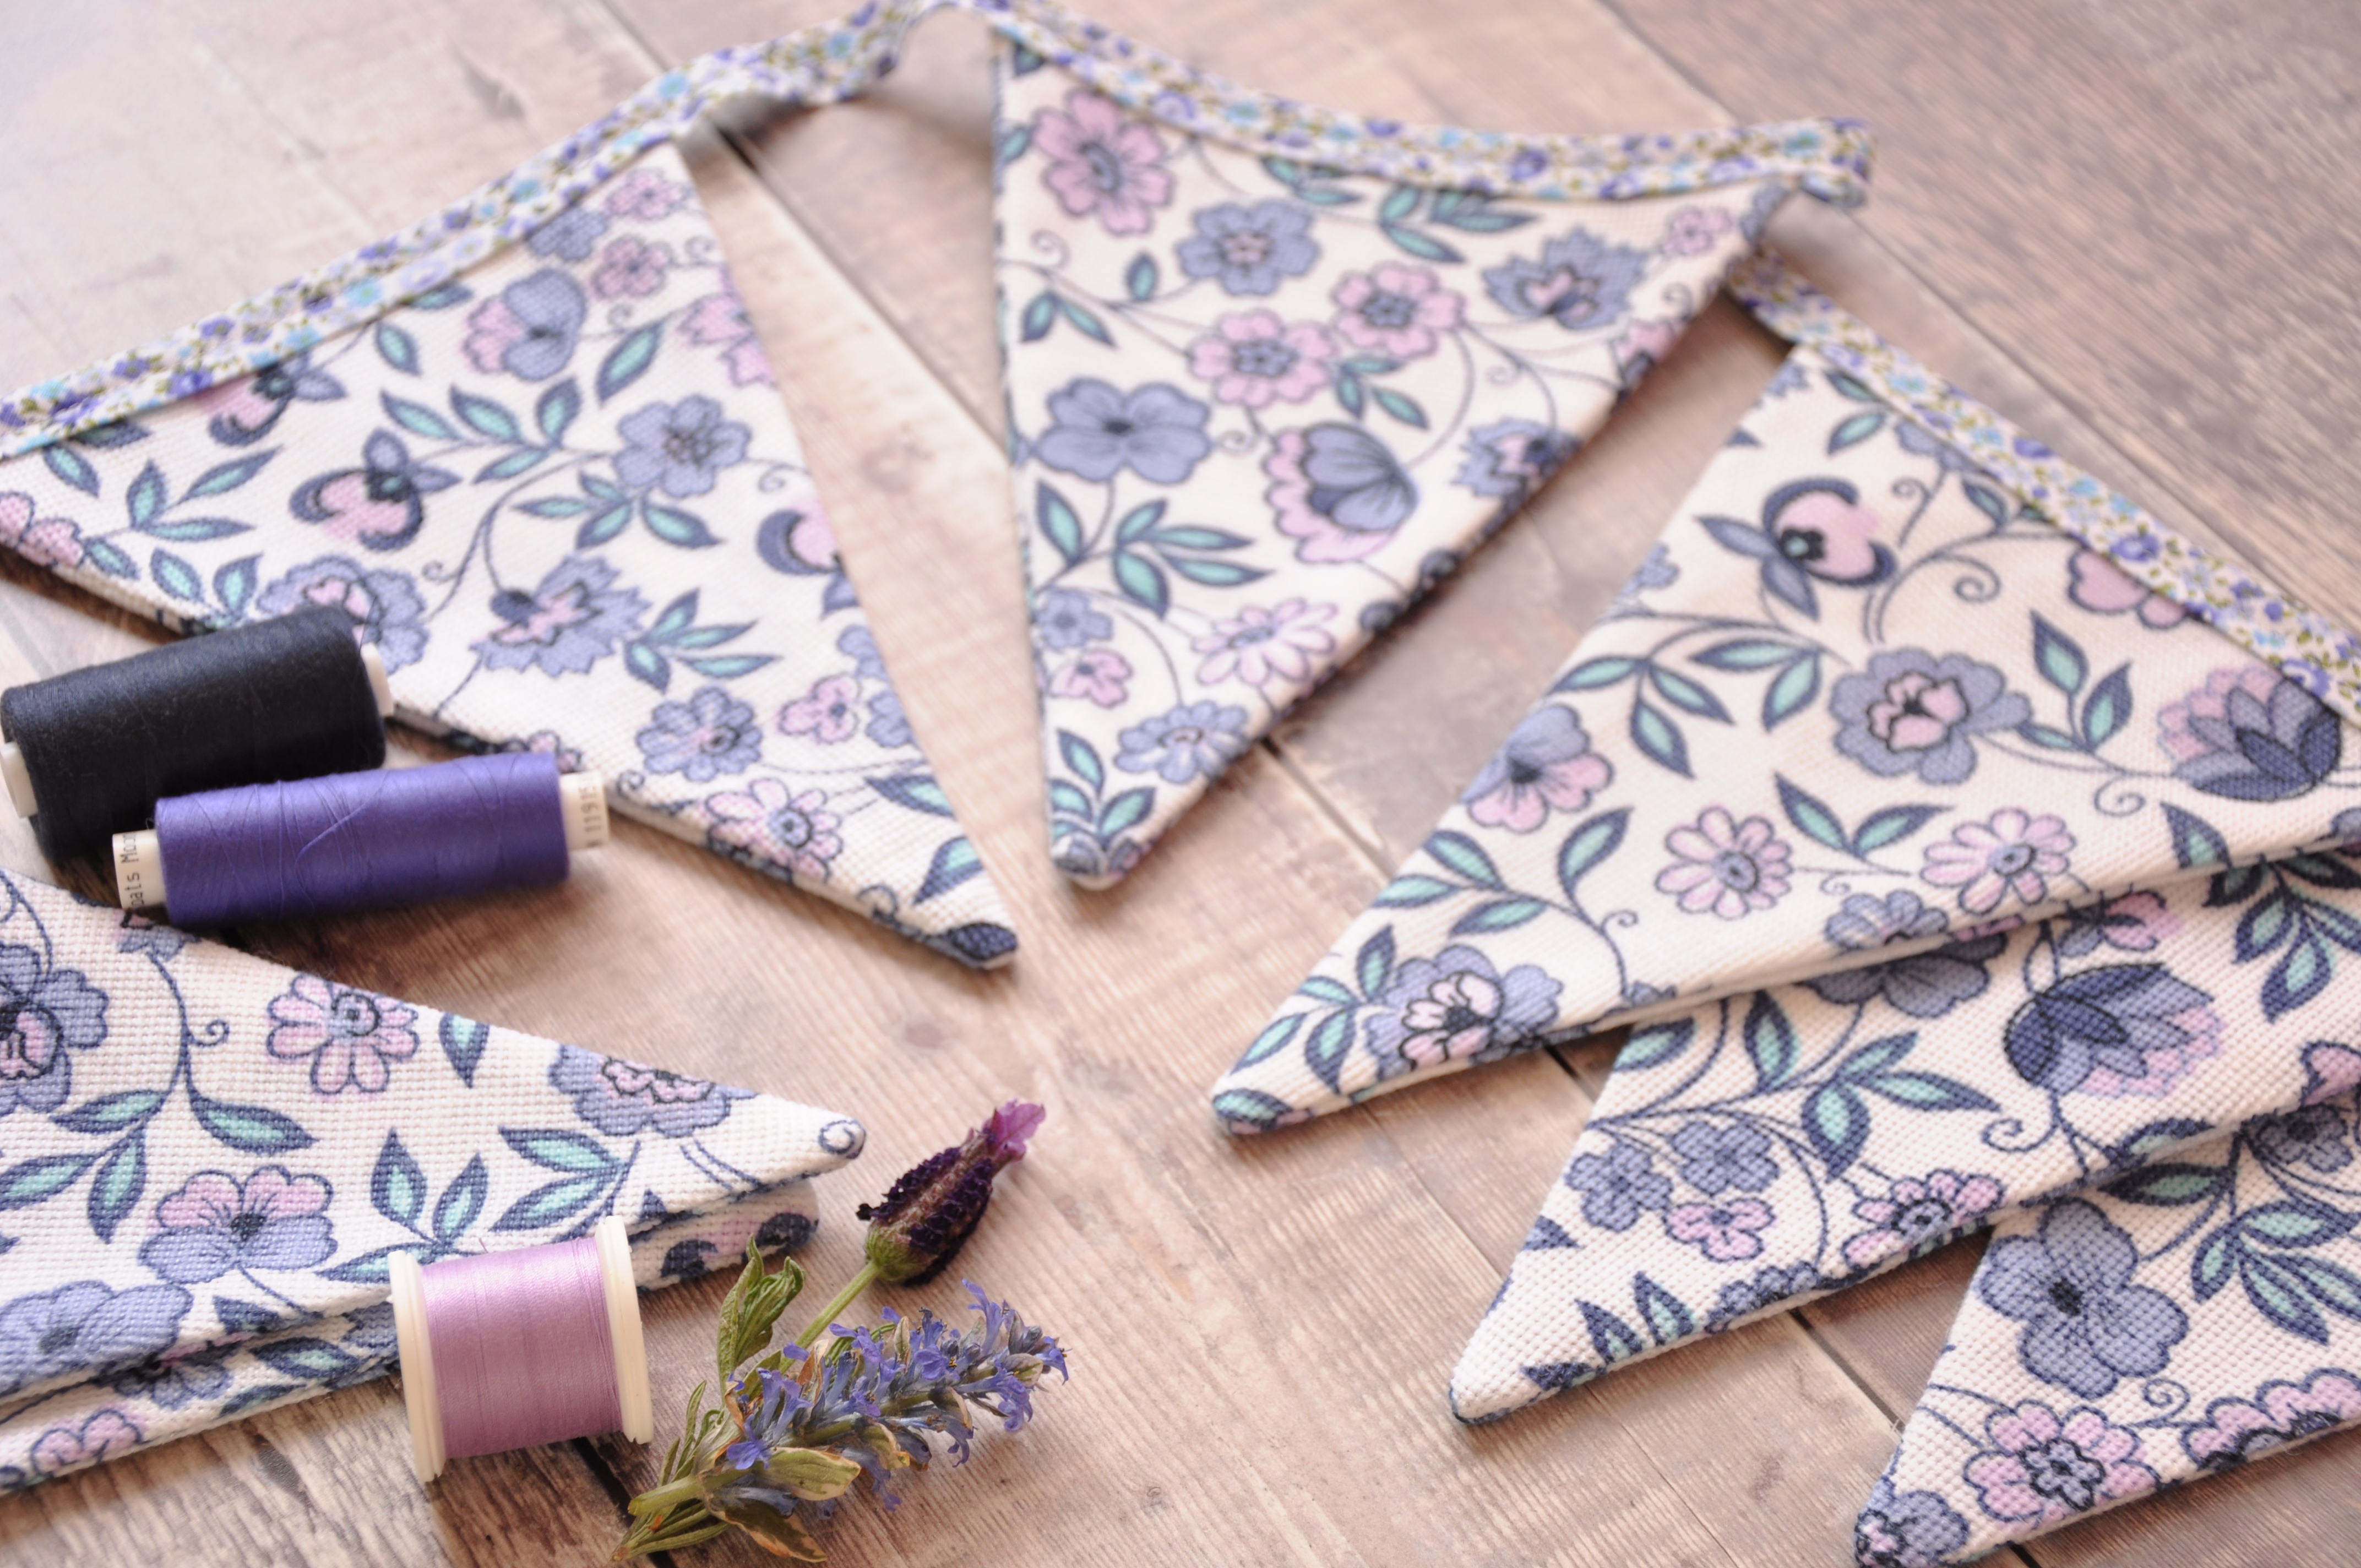 Tutorial: how to make bunting